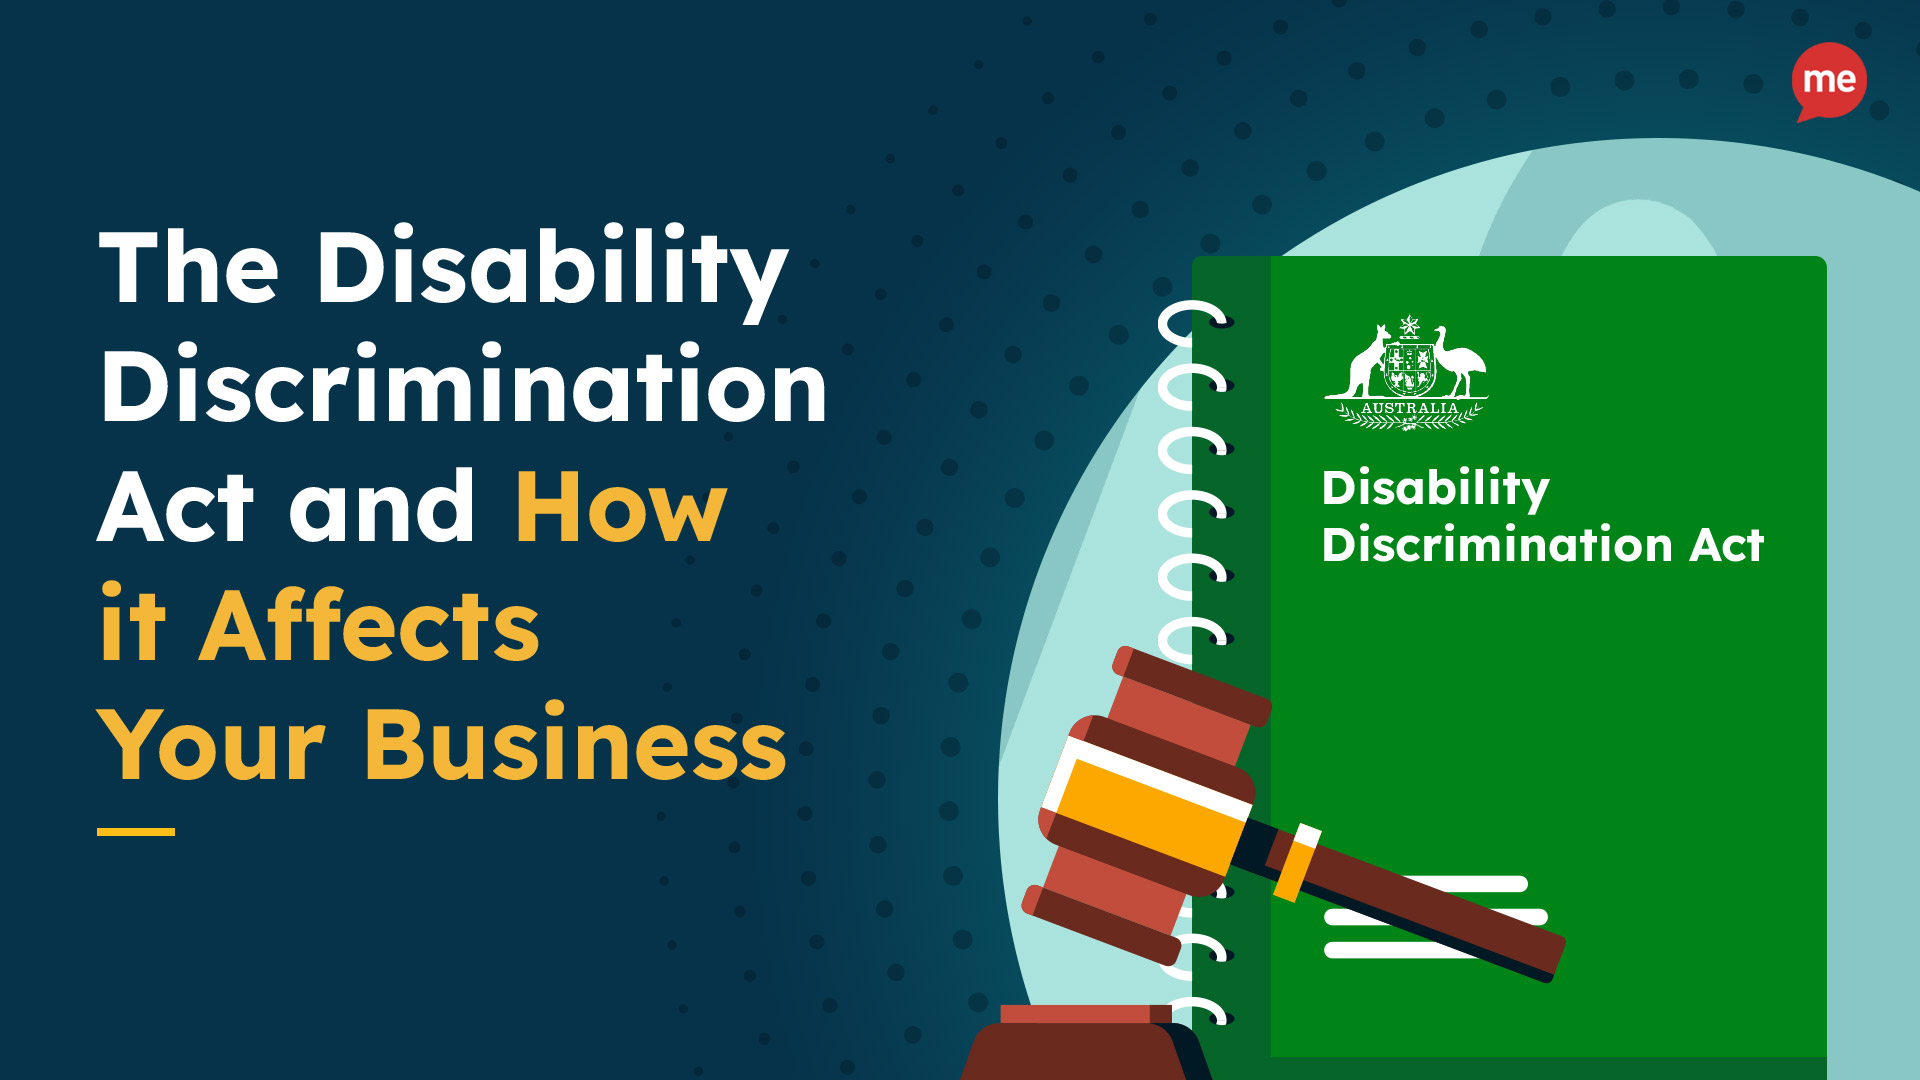 The Disability Discrimination Act and How it Affects Your Business